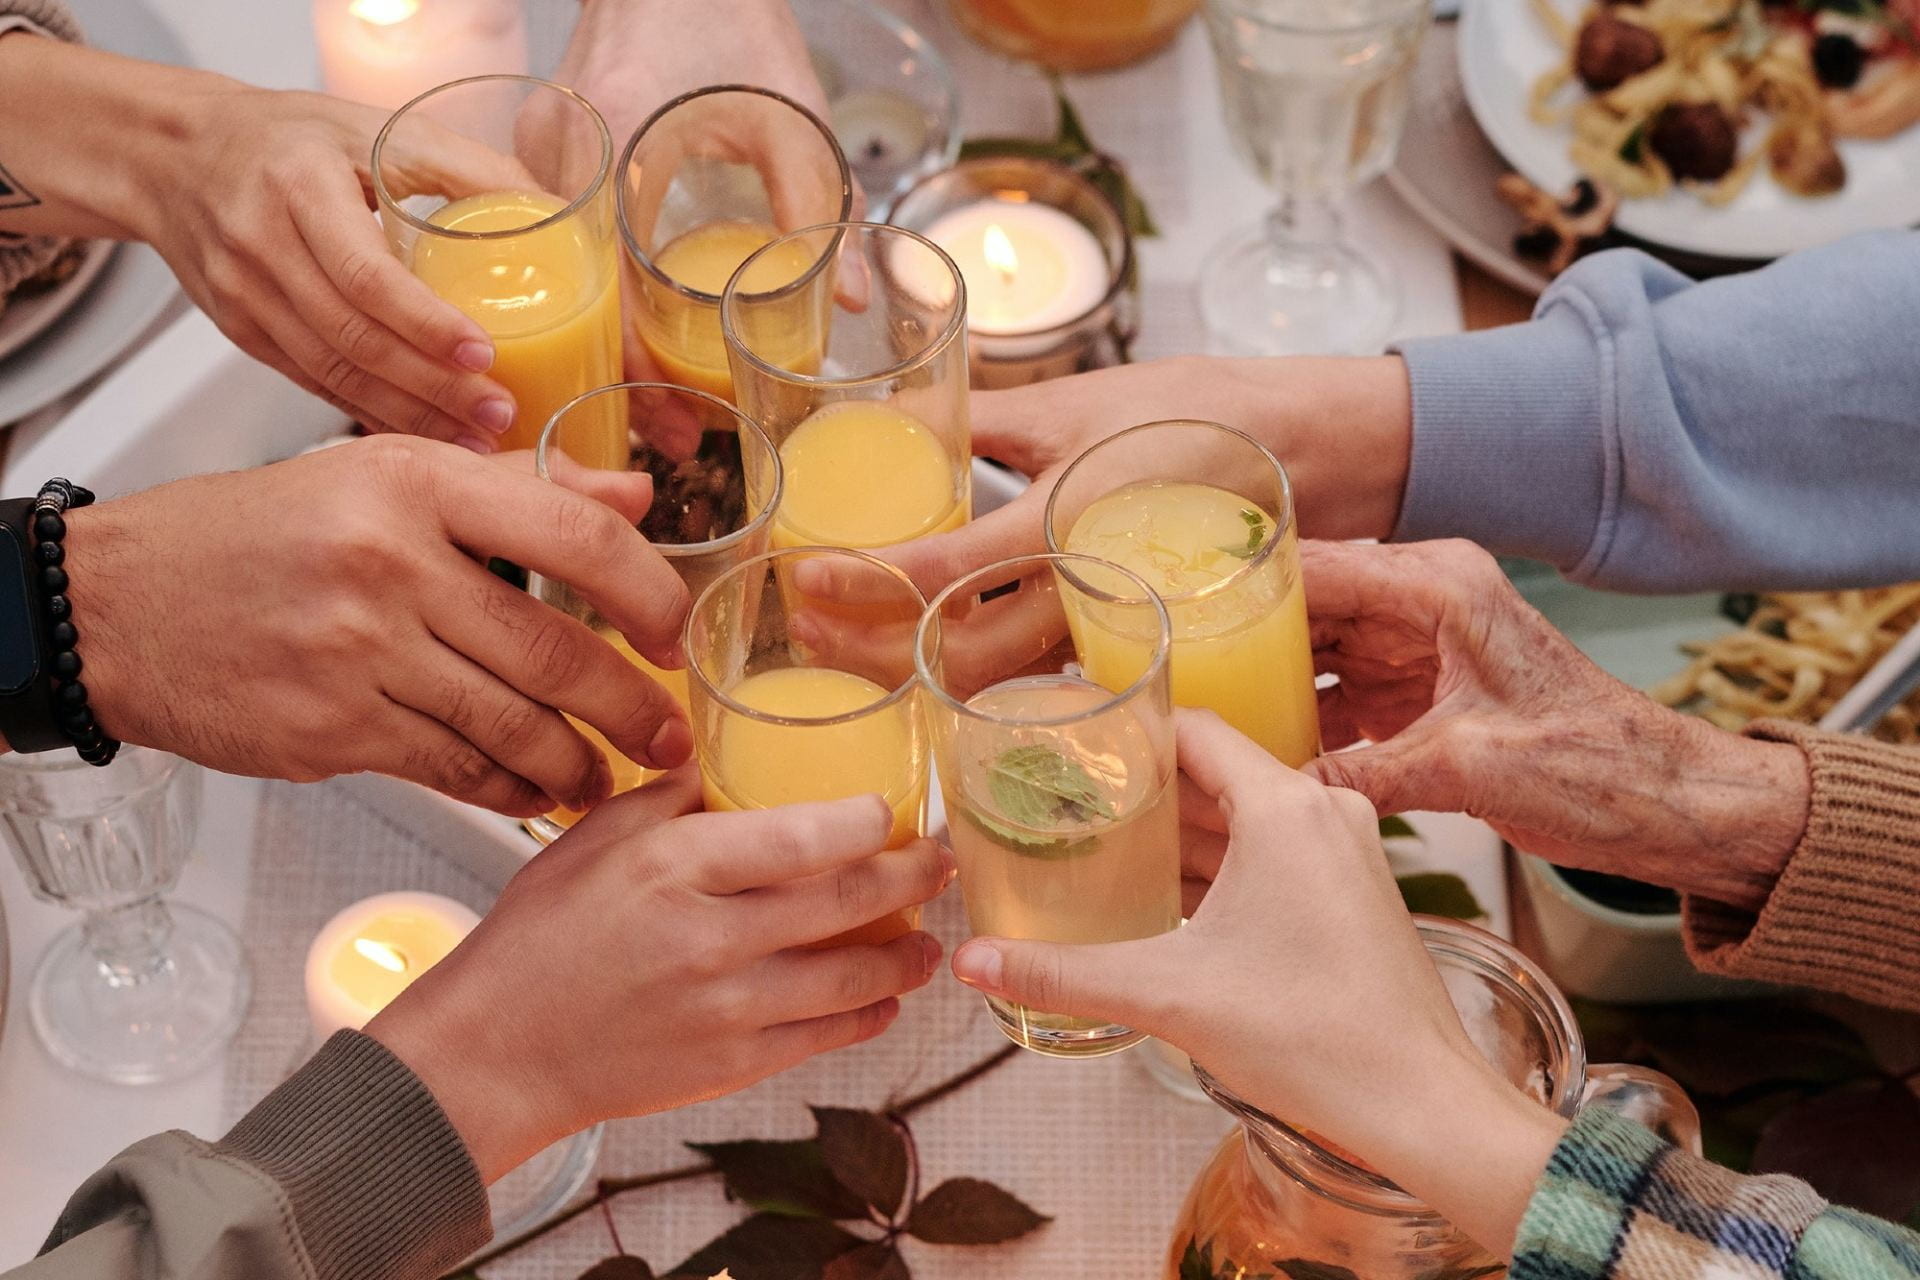 Group of hands toasting with drinks